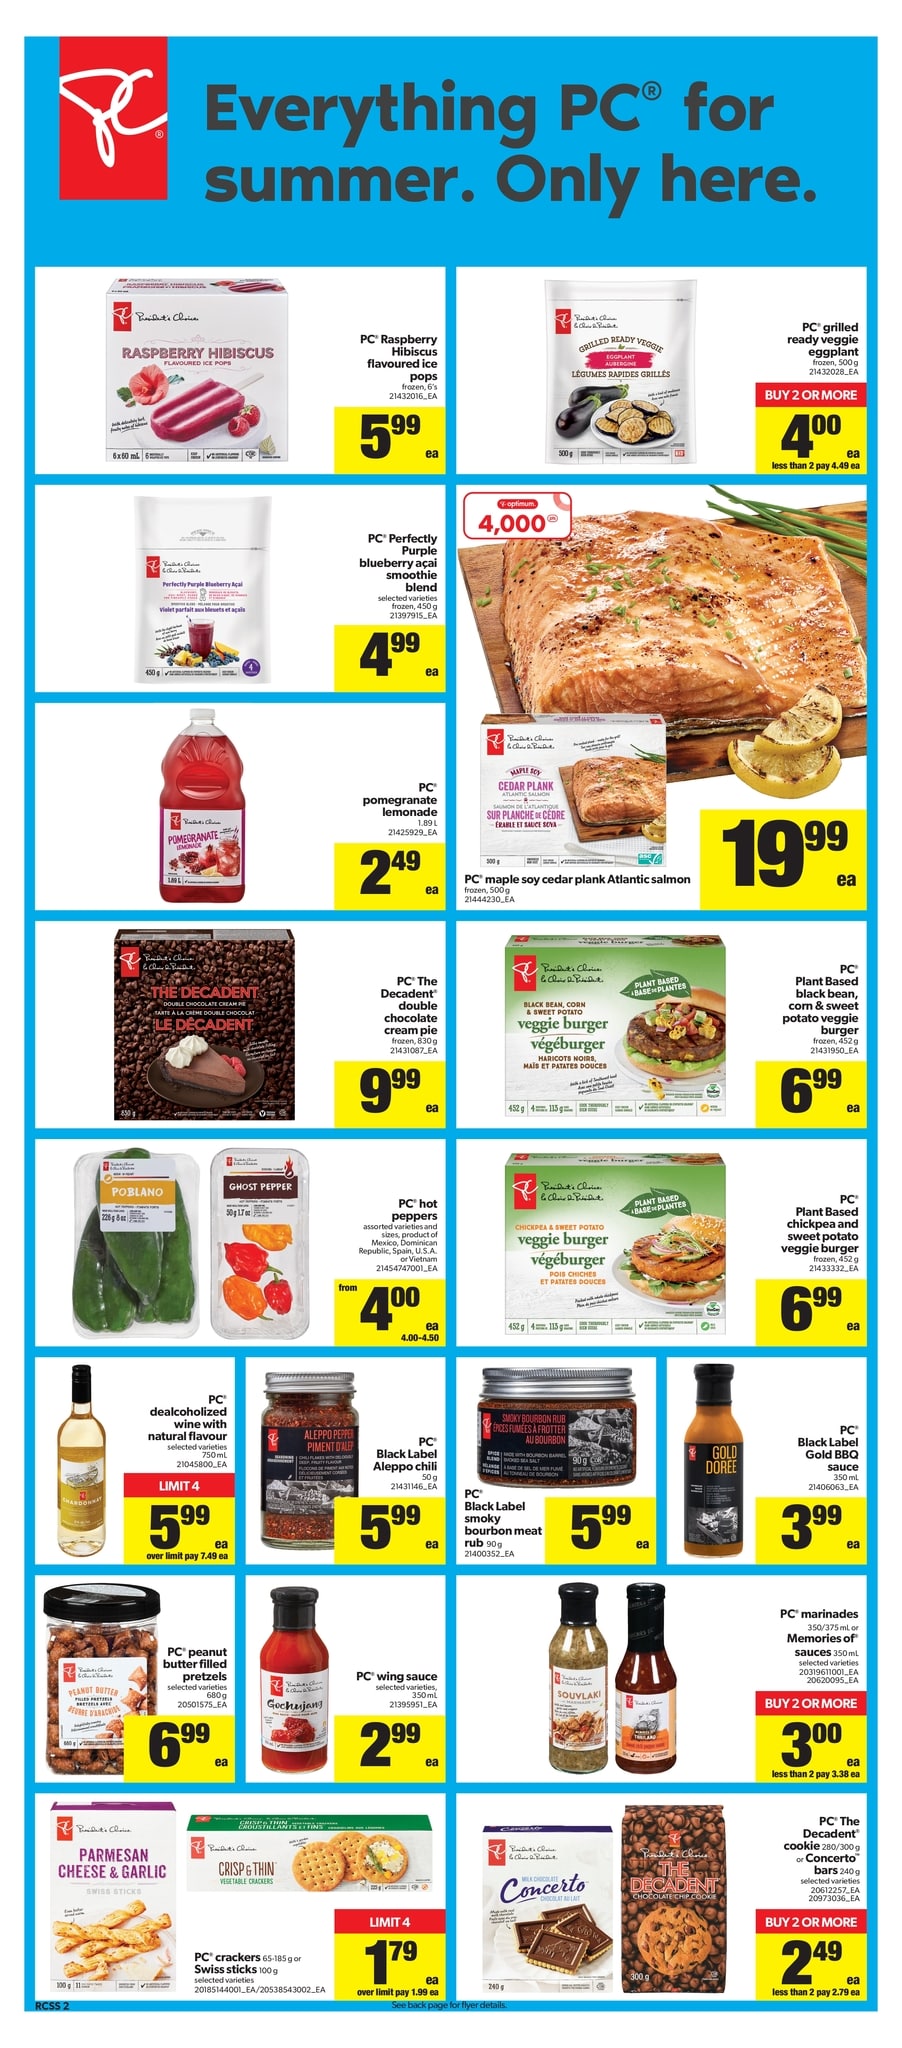 Real Canadian Superstore Ontario - Weekly Flyer Specials - Page 3